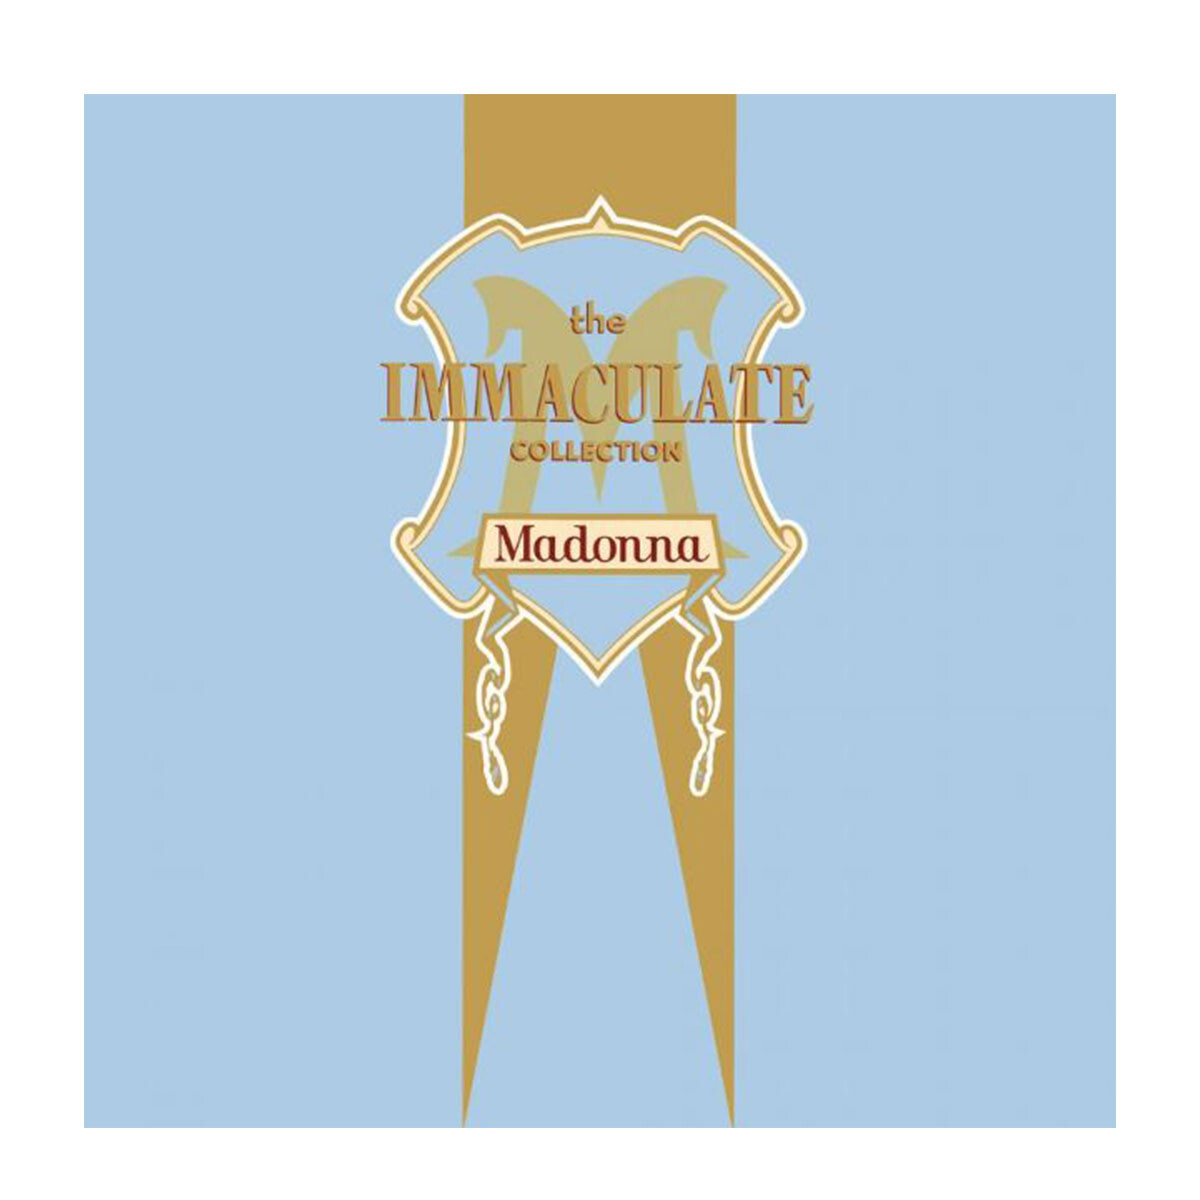 Madonna-the Inmaculate Collection - Vinilo 